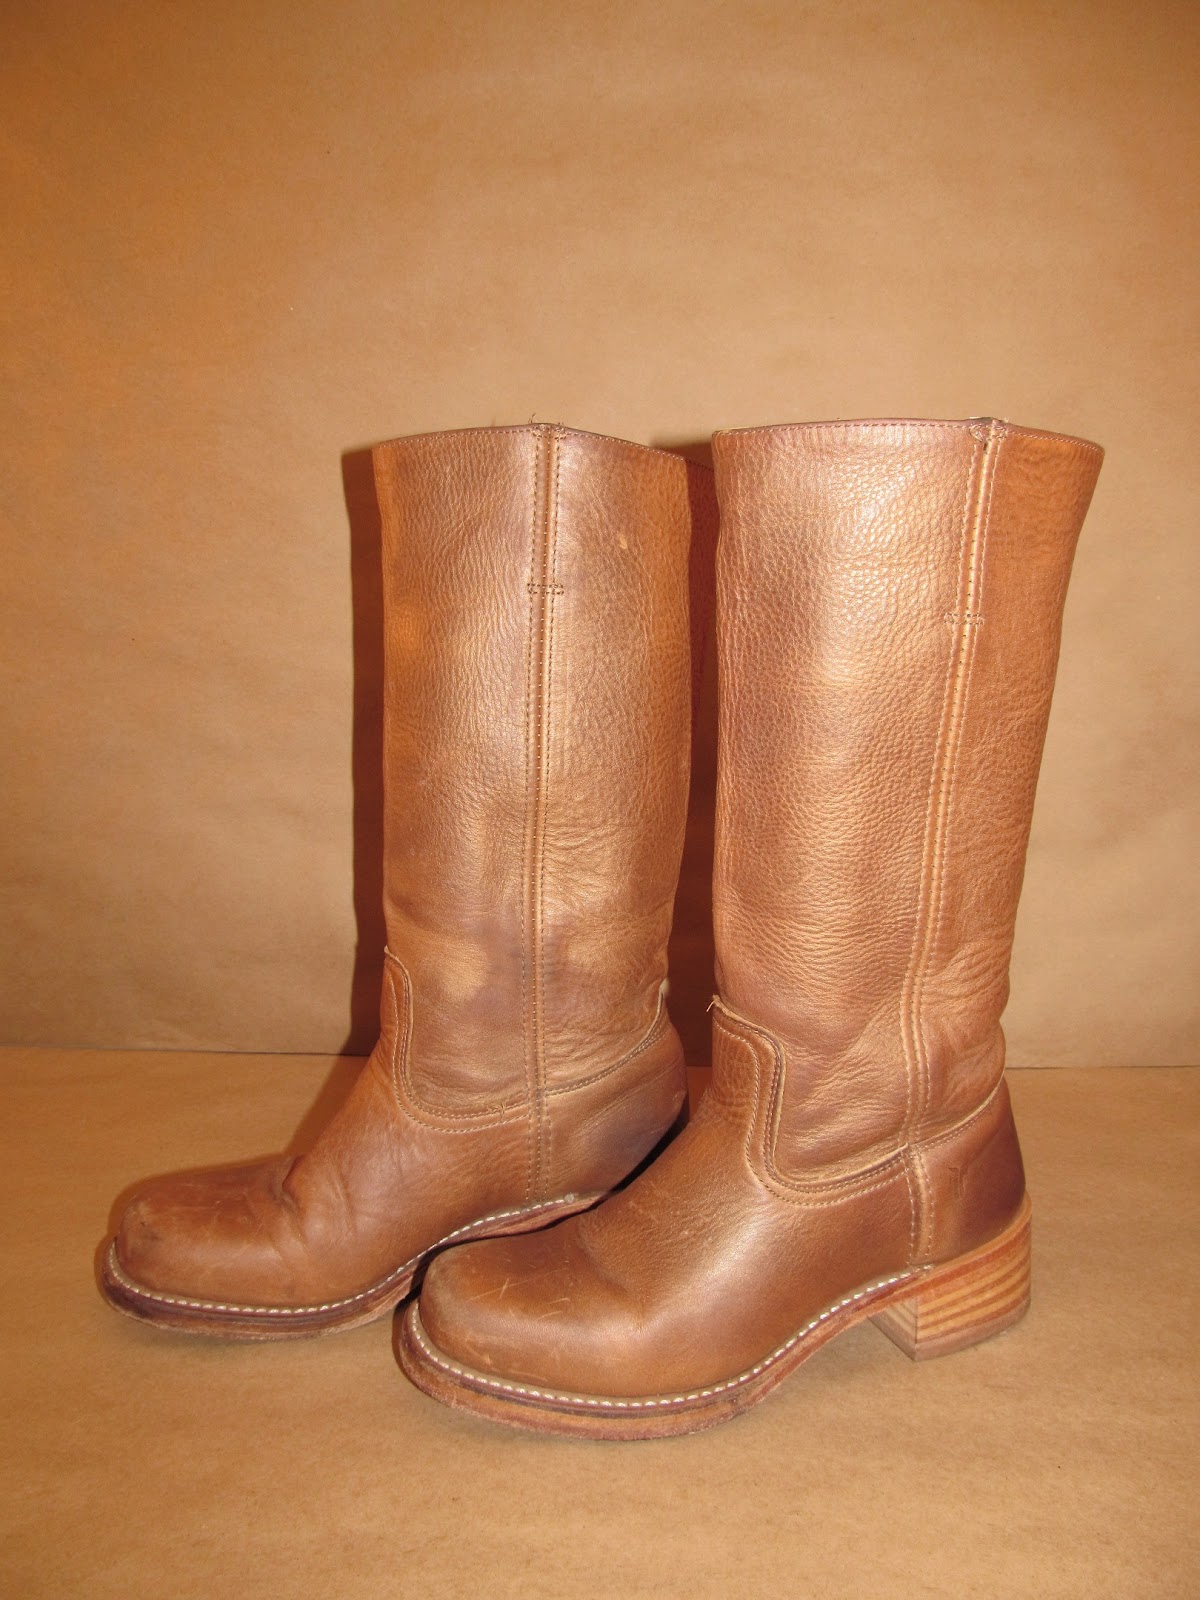 laws of general economy: Frye tall Tan leather Campus Boots size 8.5 M